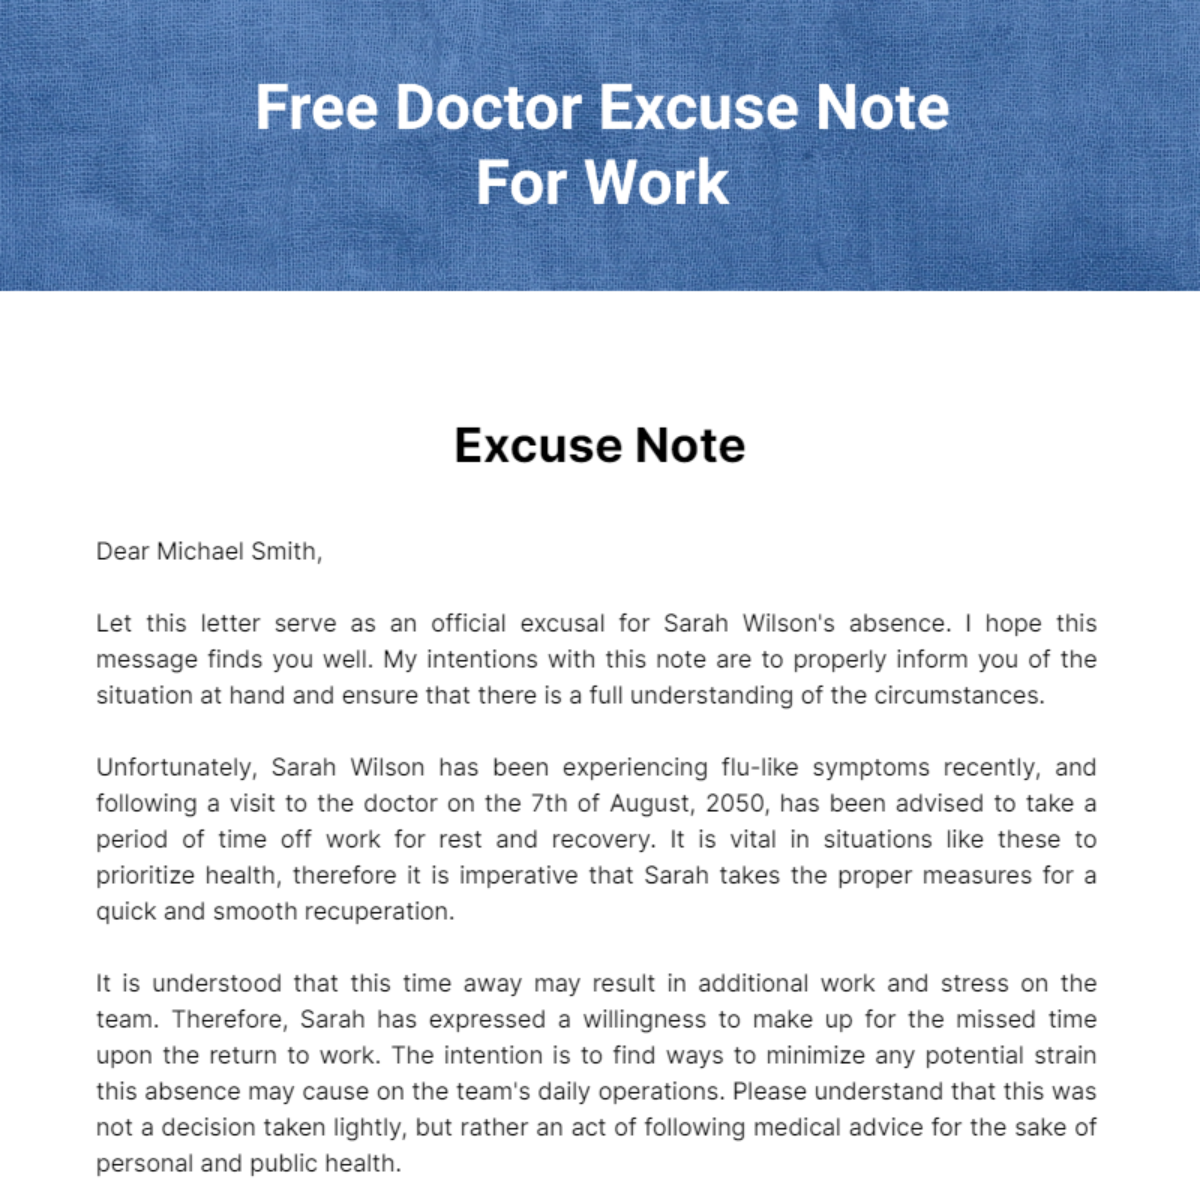 Free Doctor Excuse Note For Work Template